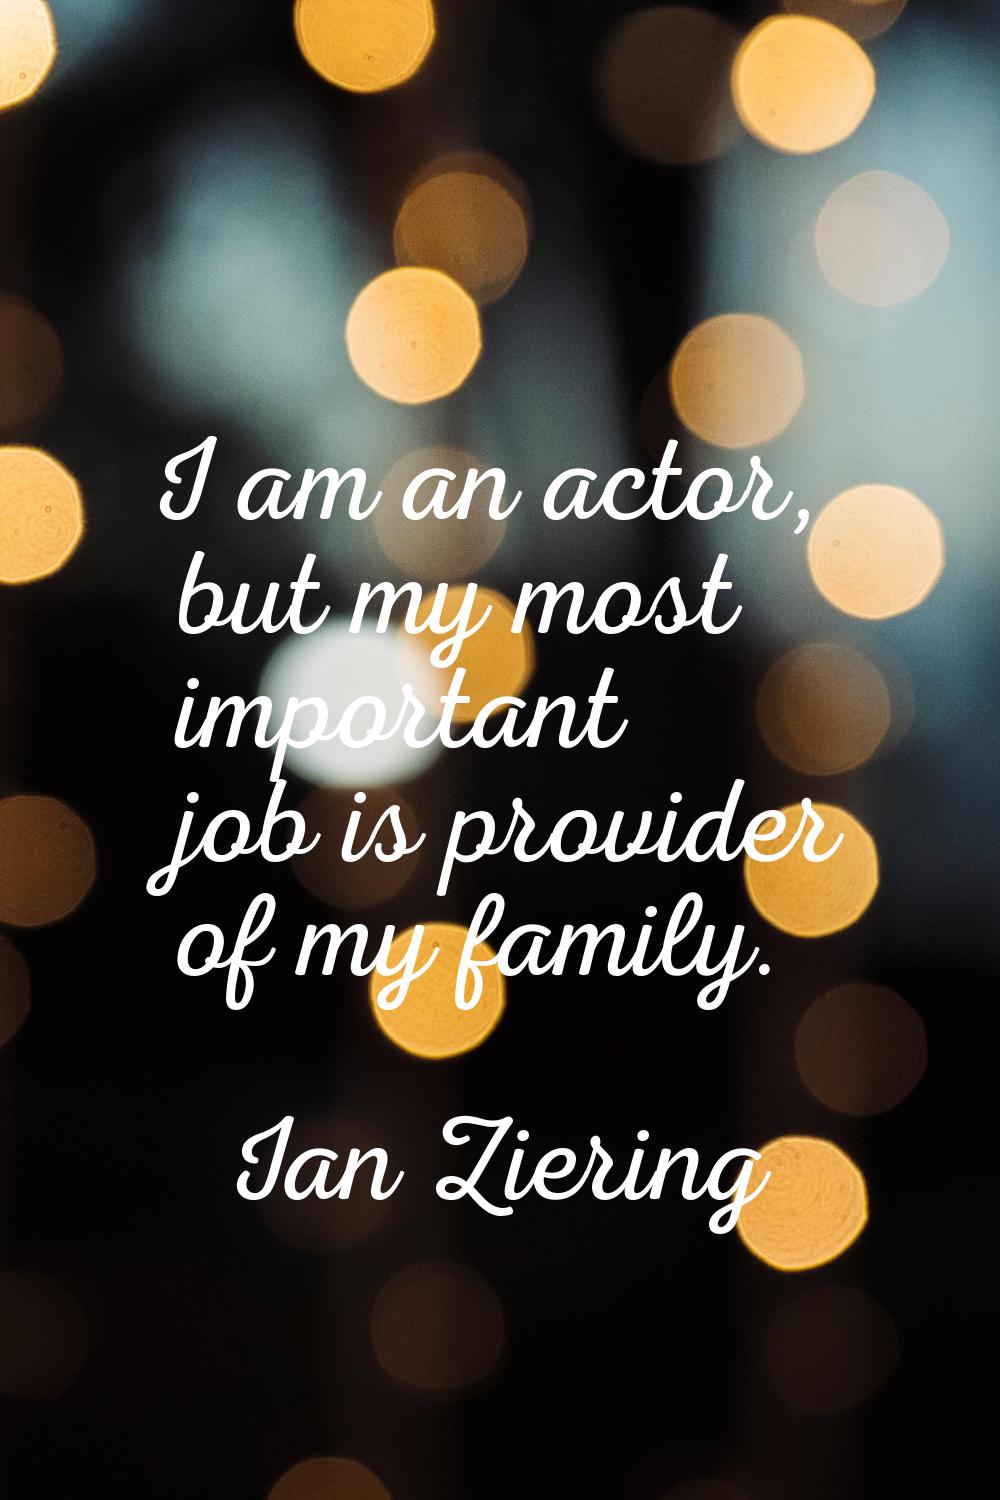 I am an actor, but my most important job is provider of my family.